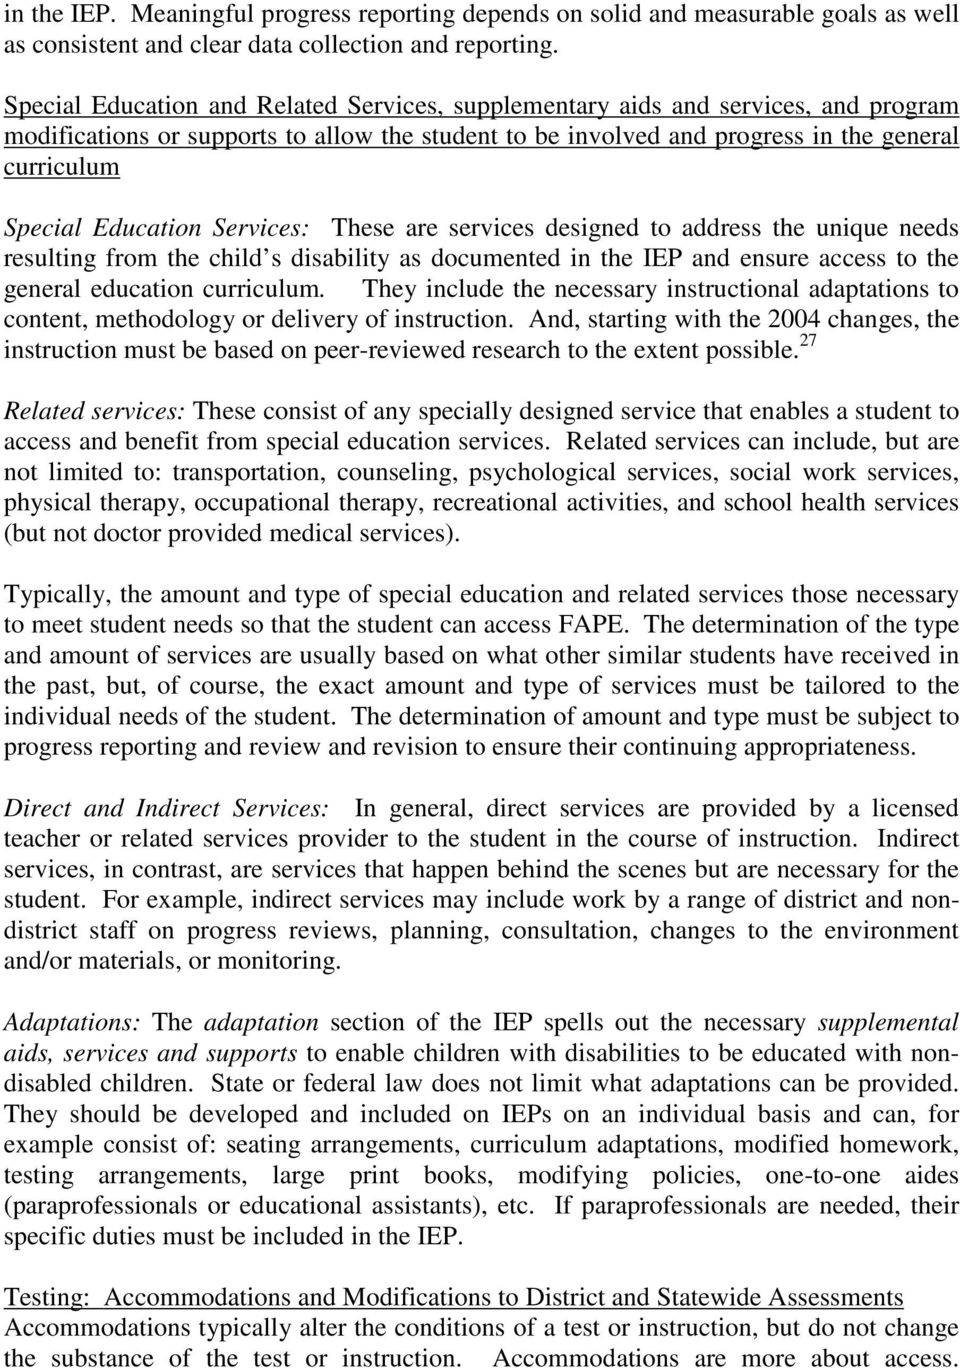 Education Services: These are services designed to address the unique needs resulting from the child s disability as documented in the IEP and ensure access to the general education curriculum.